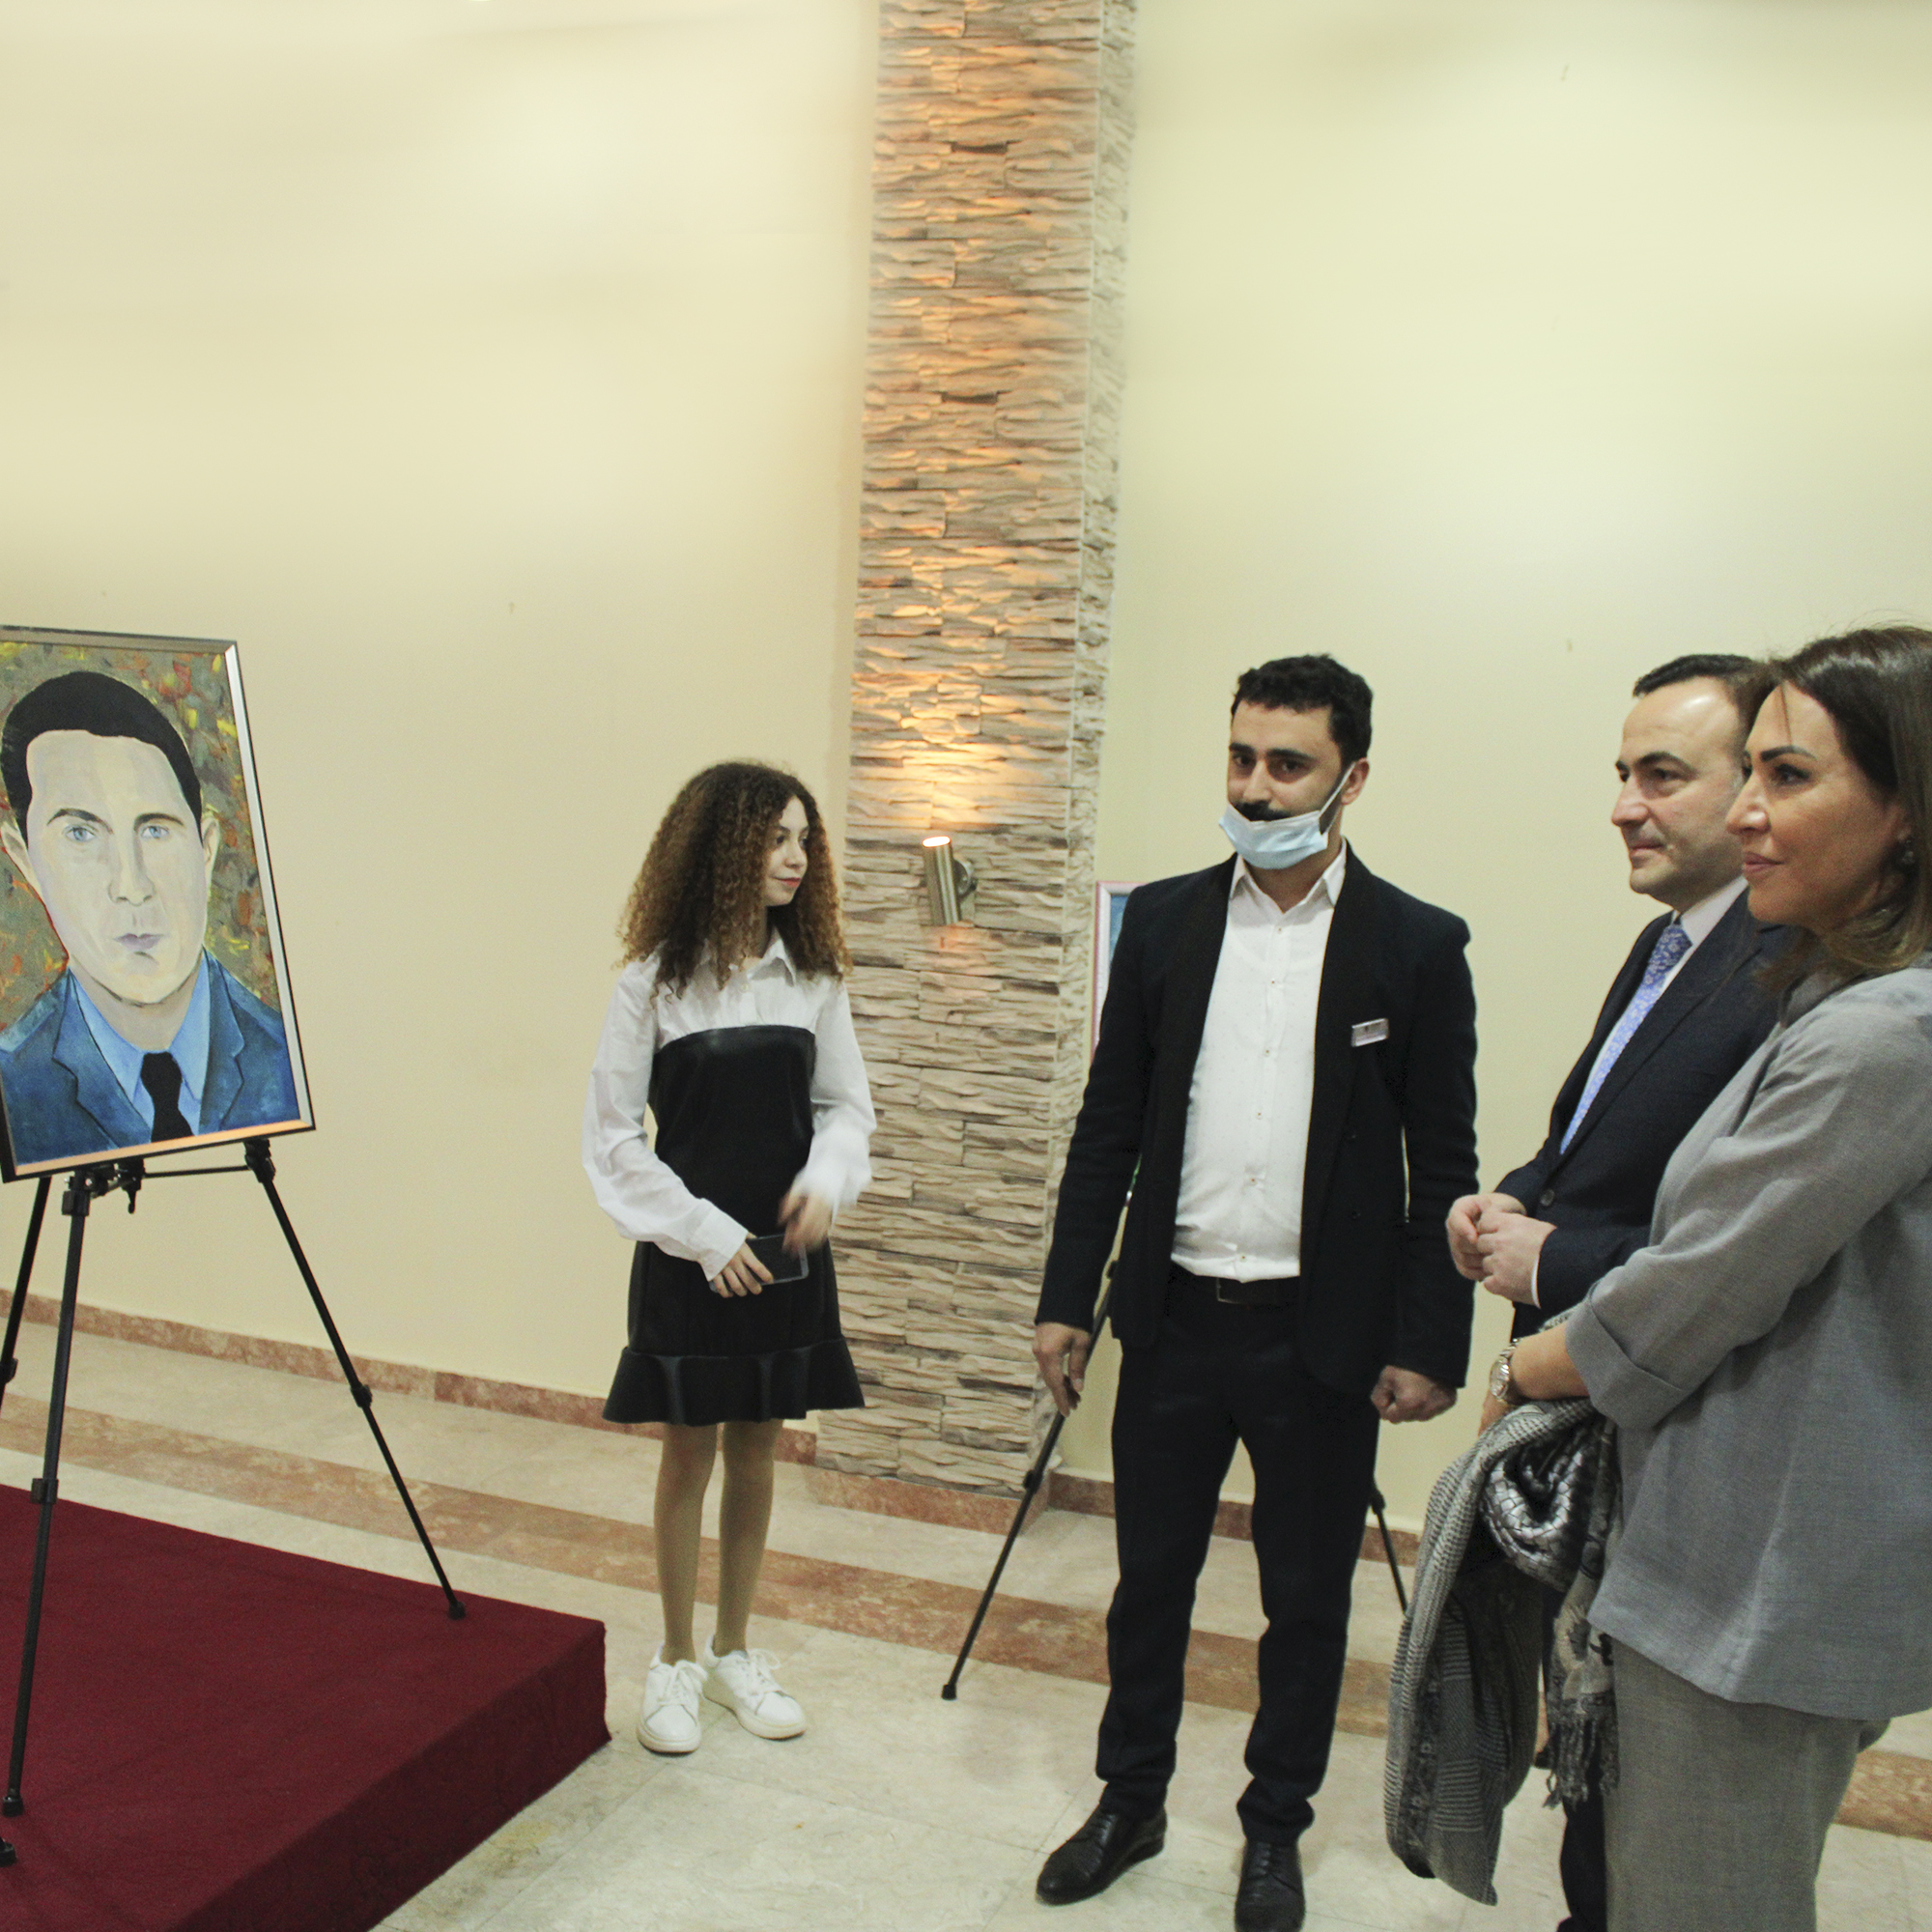 Heydar Aliyev Foundation donates books to orphanages and boarding schools